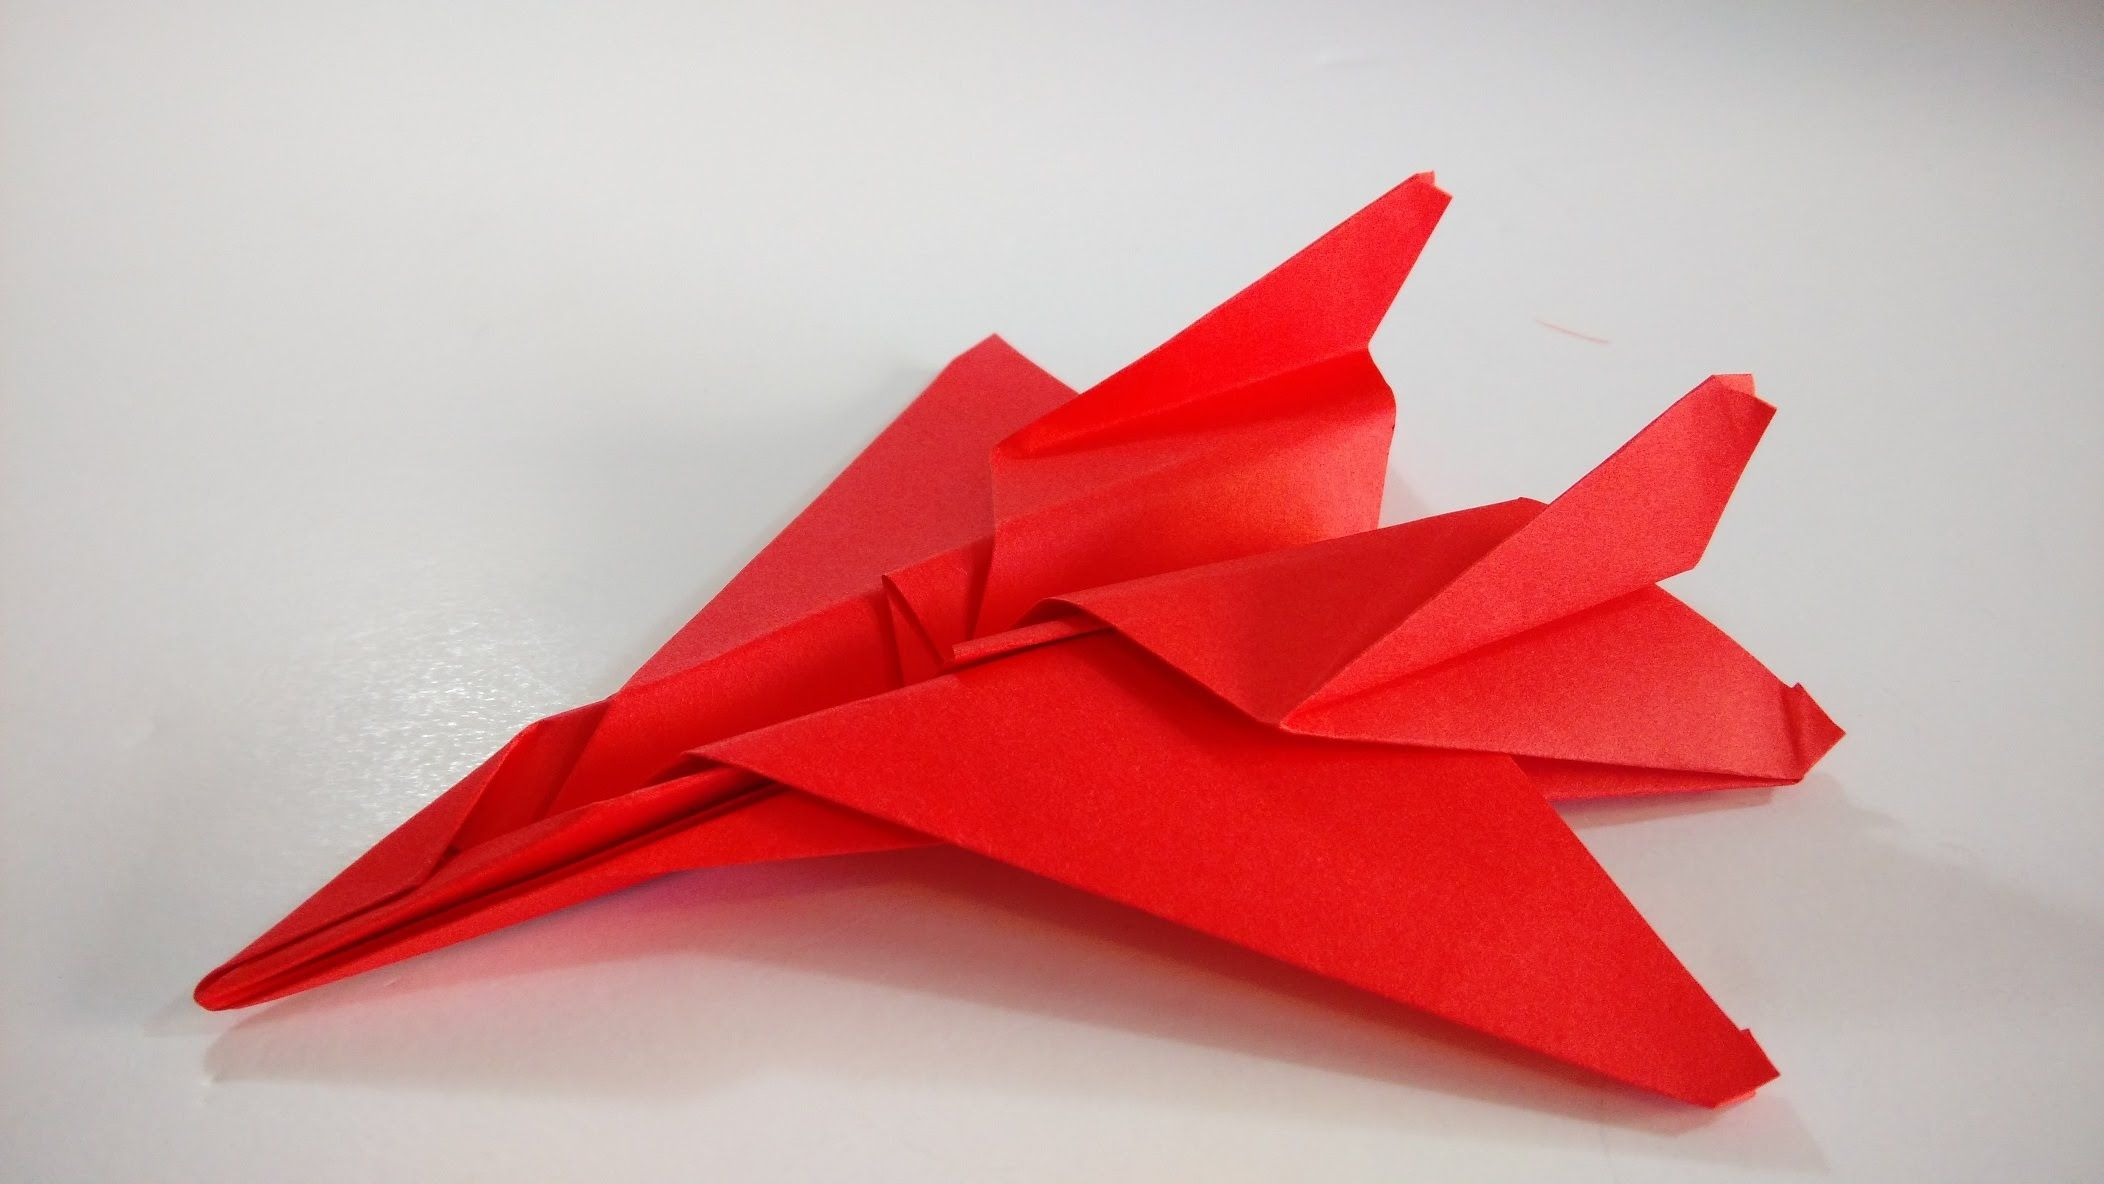 How To Make Cool Origami Toys Como Un Avion De F Eagle Jet Fighter Ori On Cool Origami Toys And